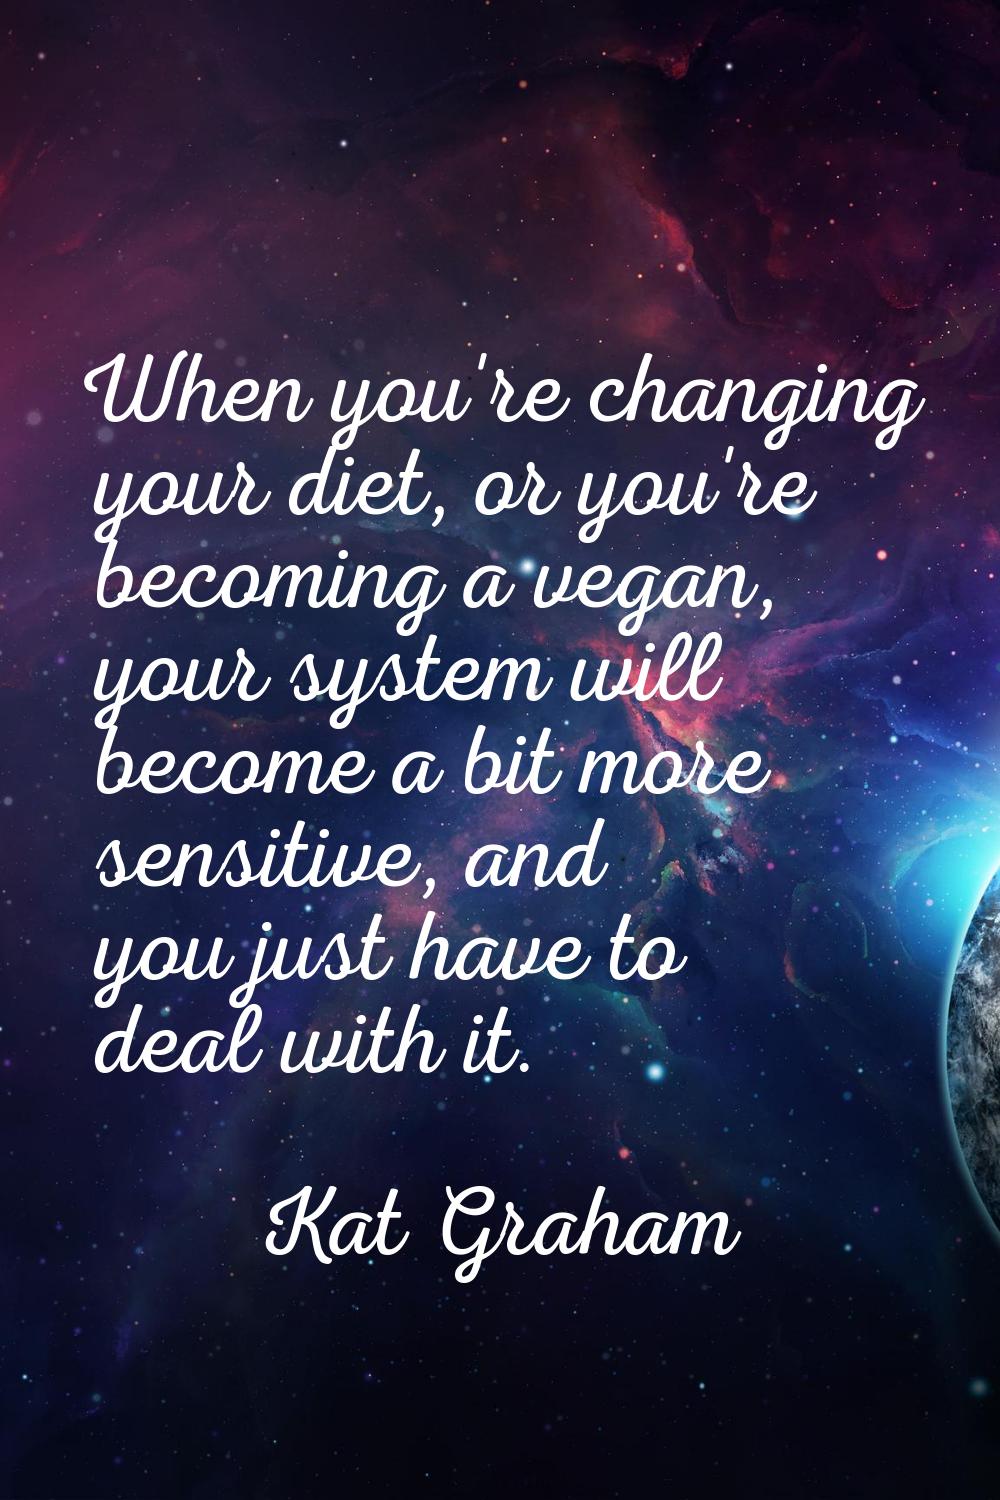 When you're changing your diet, or you're becoming a vegan, your system will become a bit more sens